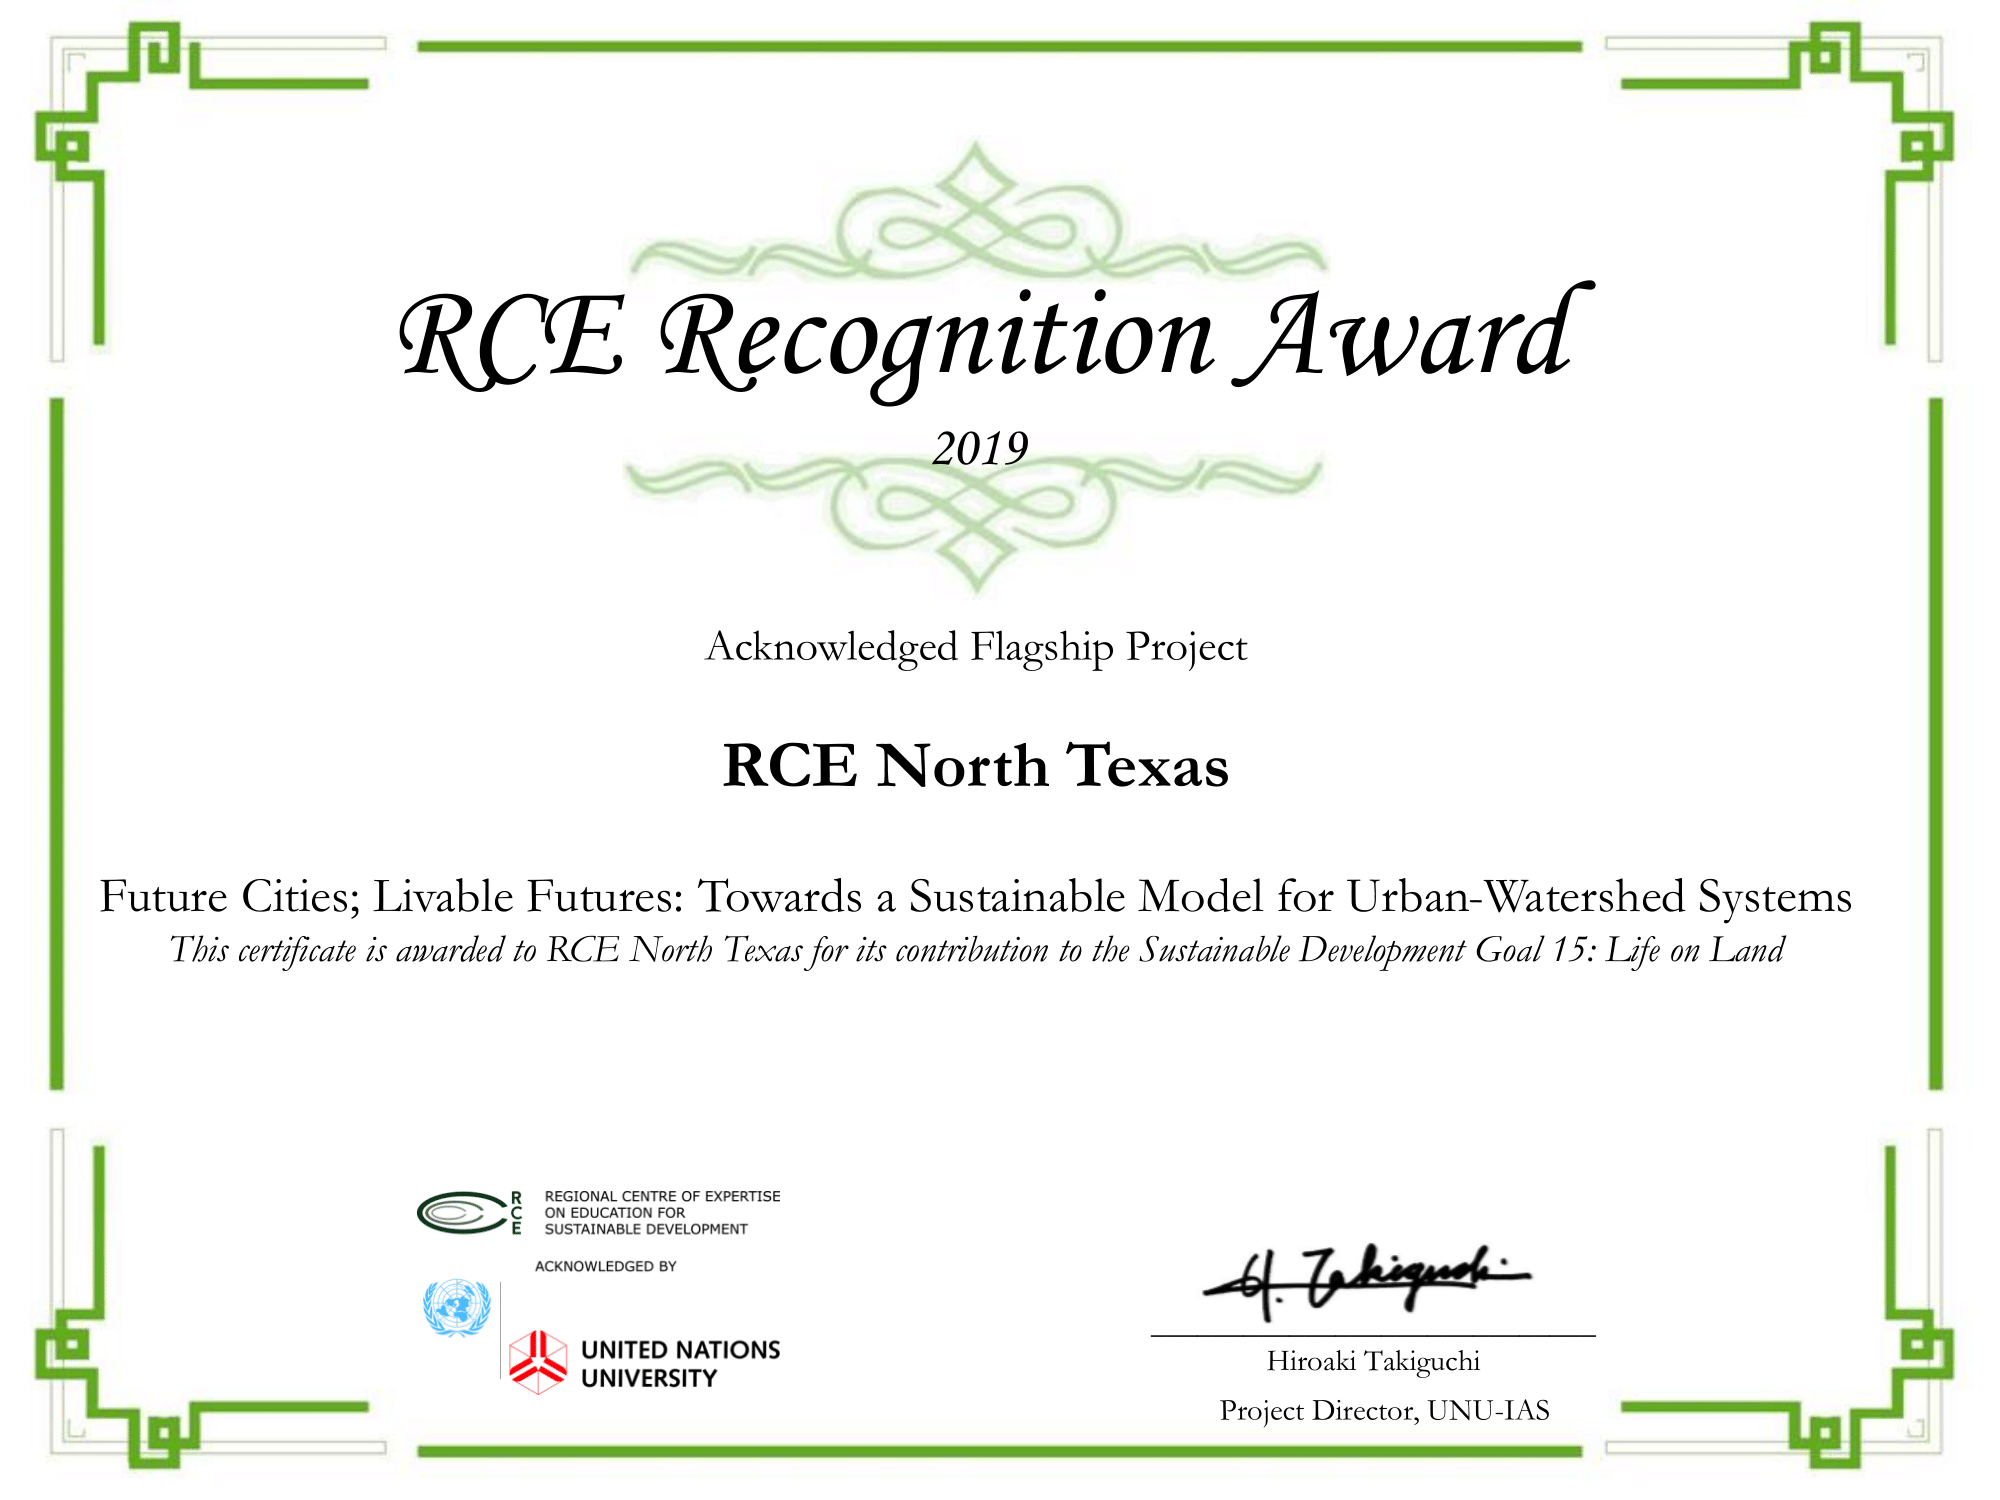 2019 Recognition Award